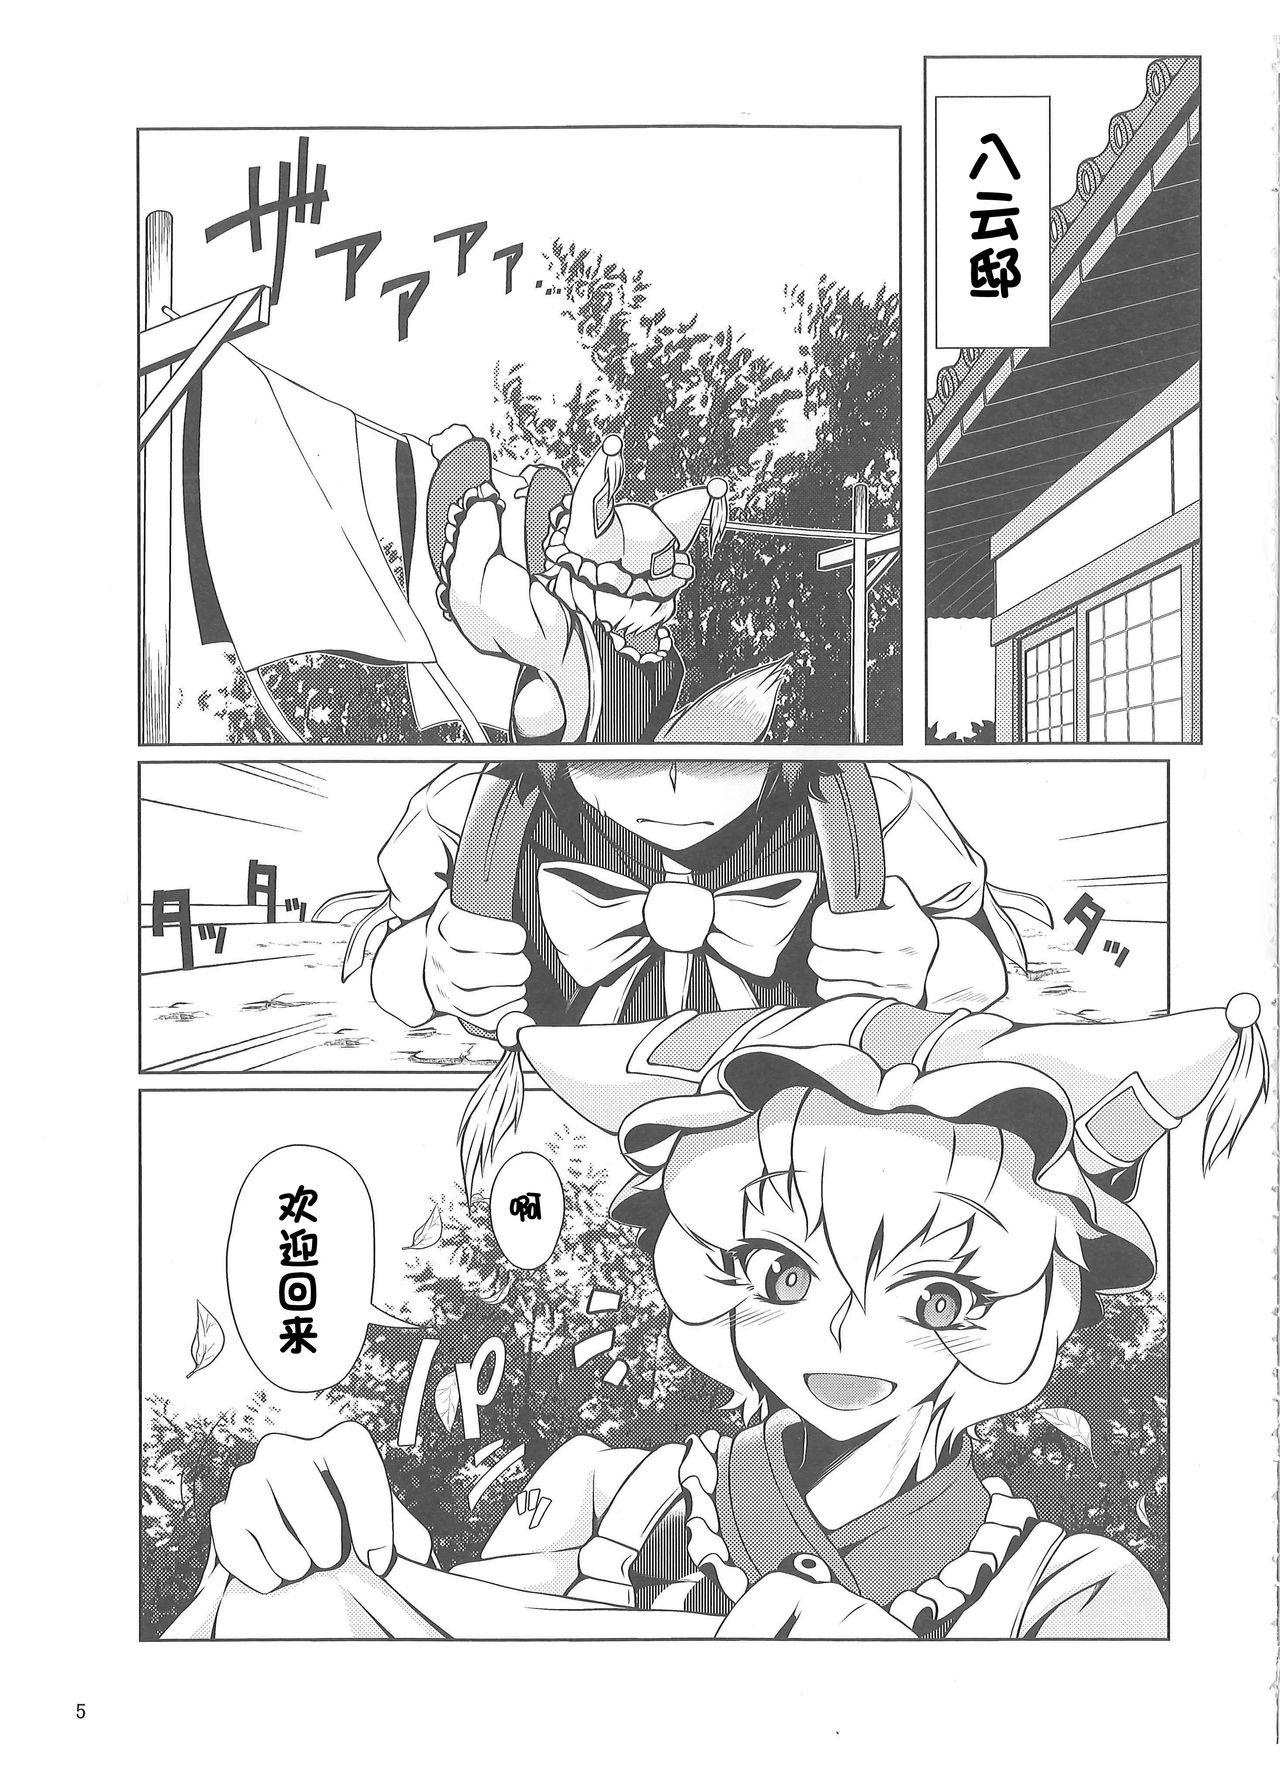 Pussy Fingering Oshioki Ranmia | 惩罚♥蓝米亚 - Touhou project Teenies - Page 4